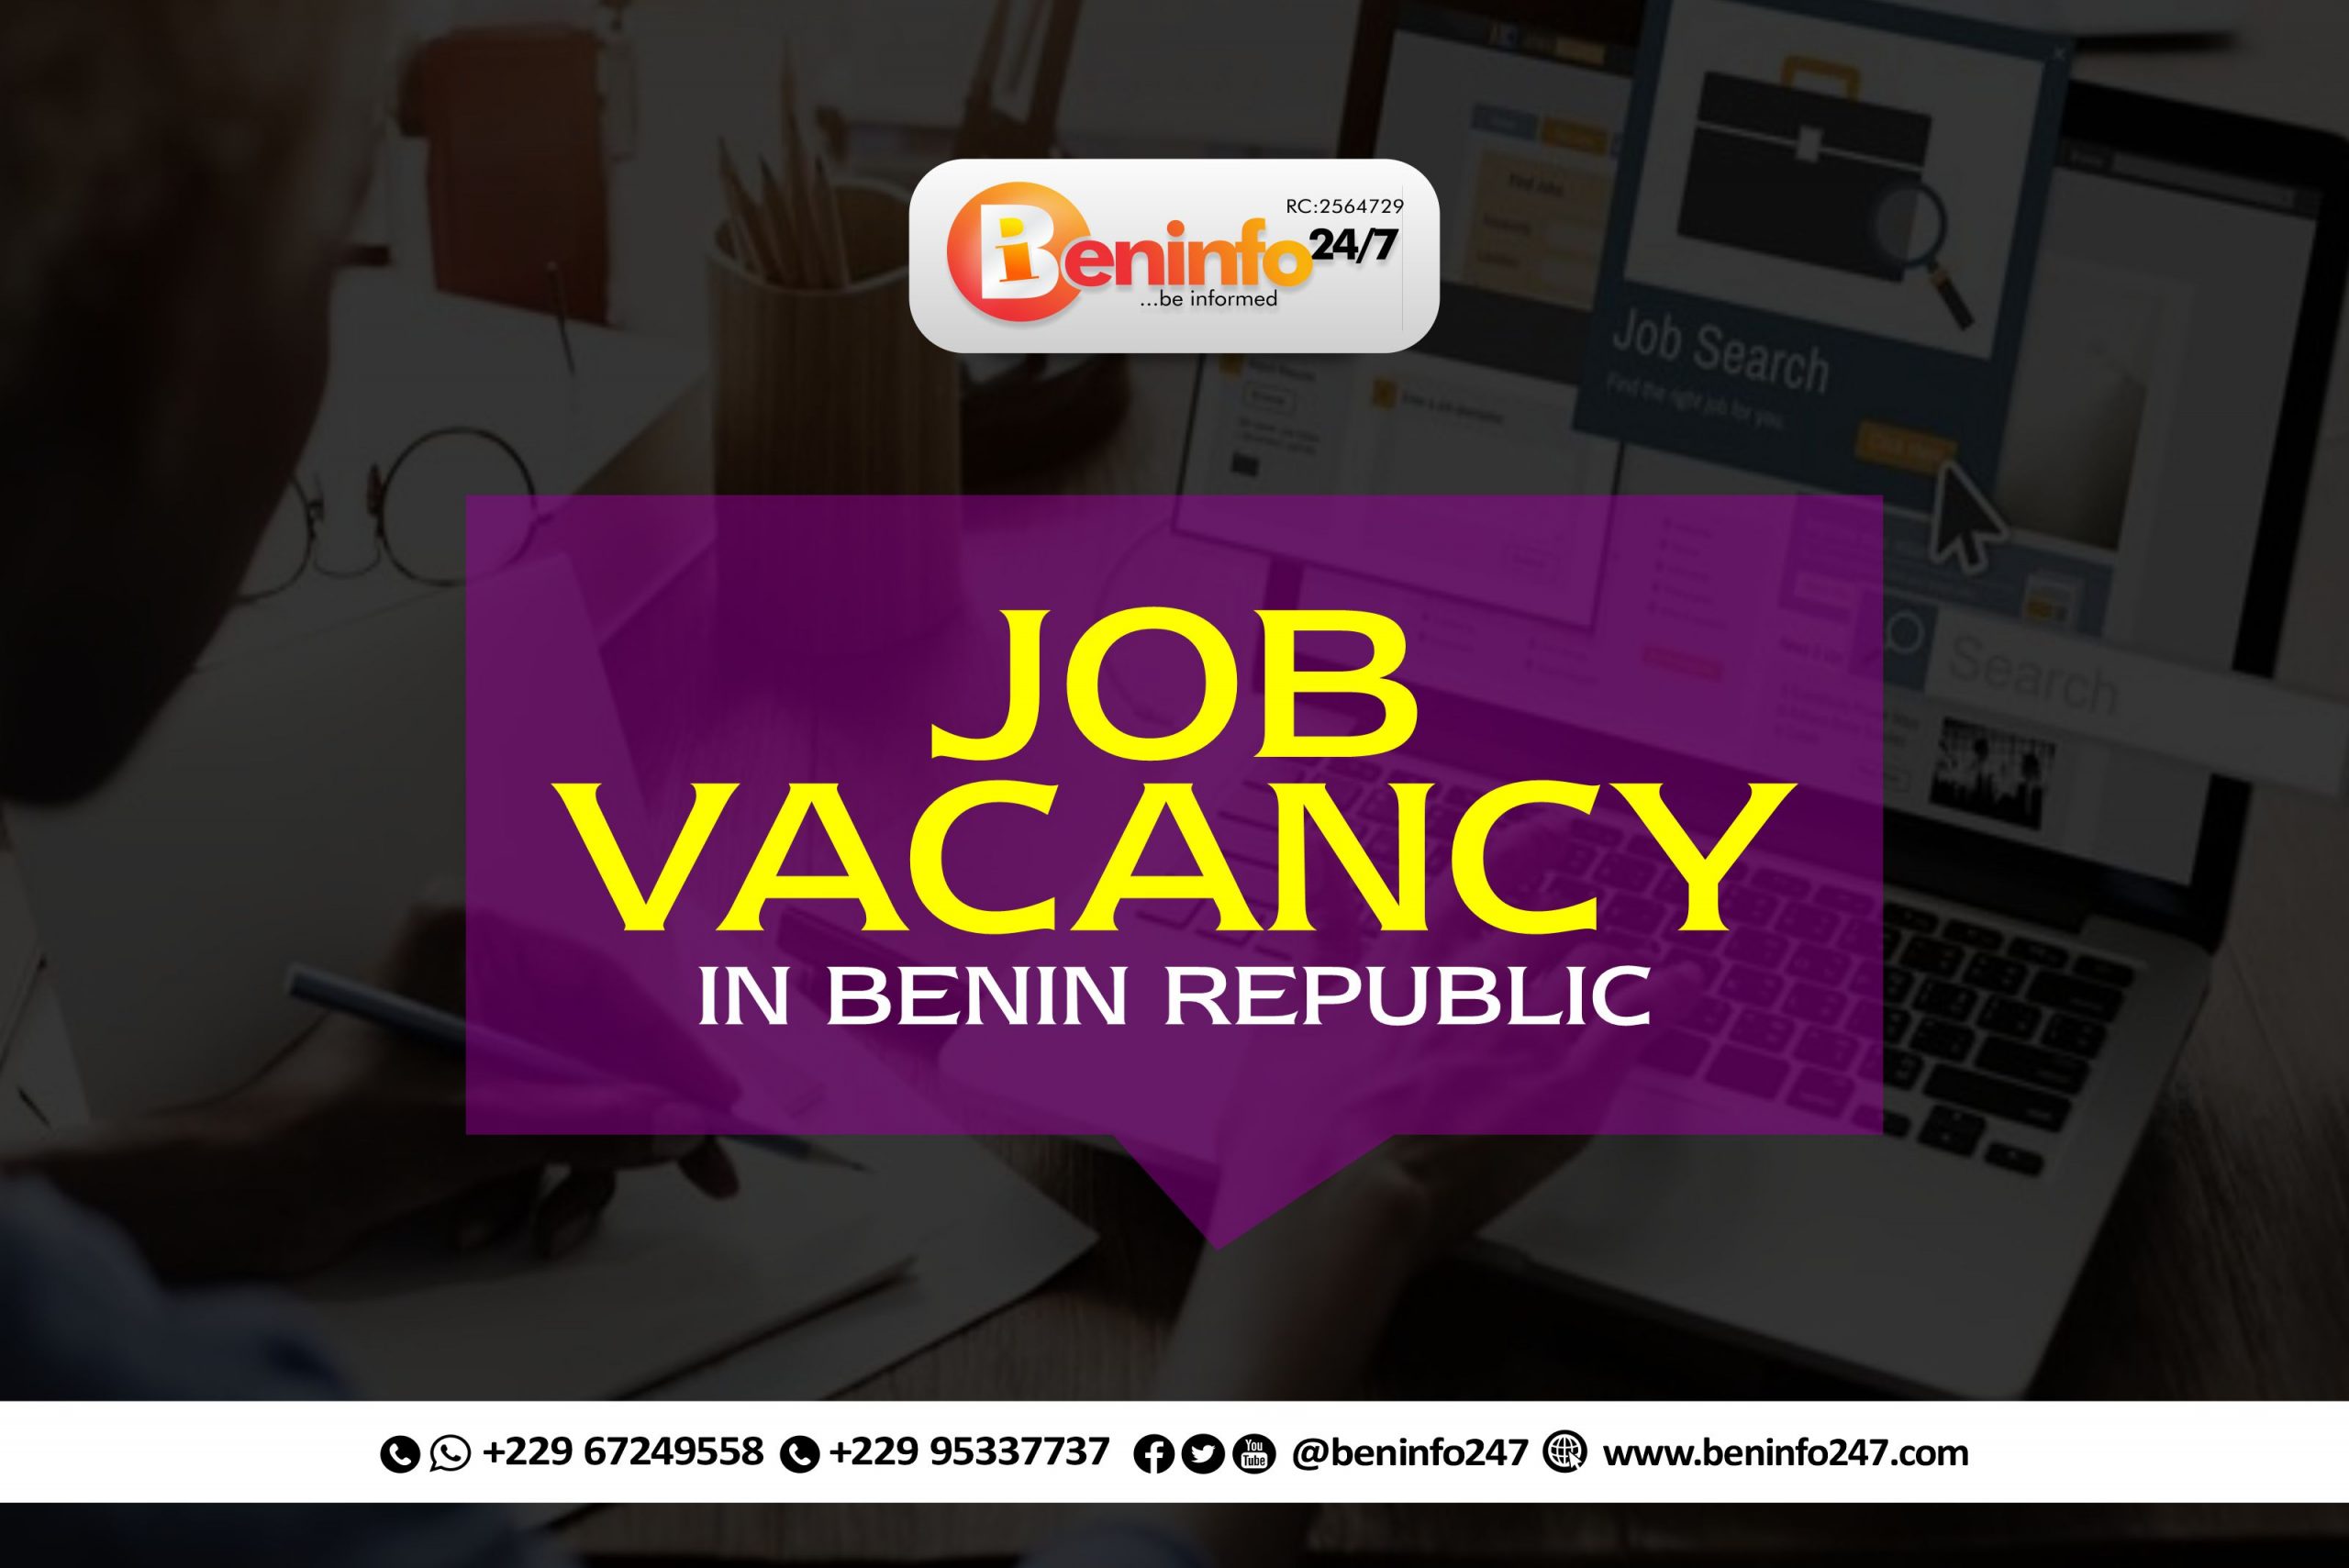 You are currently viewing 2022/2023 JOB VACANCY IN BENIN REPUBLIC